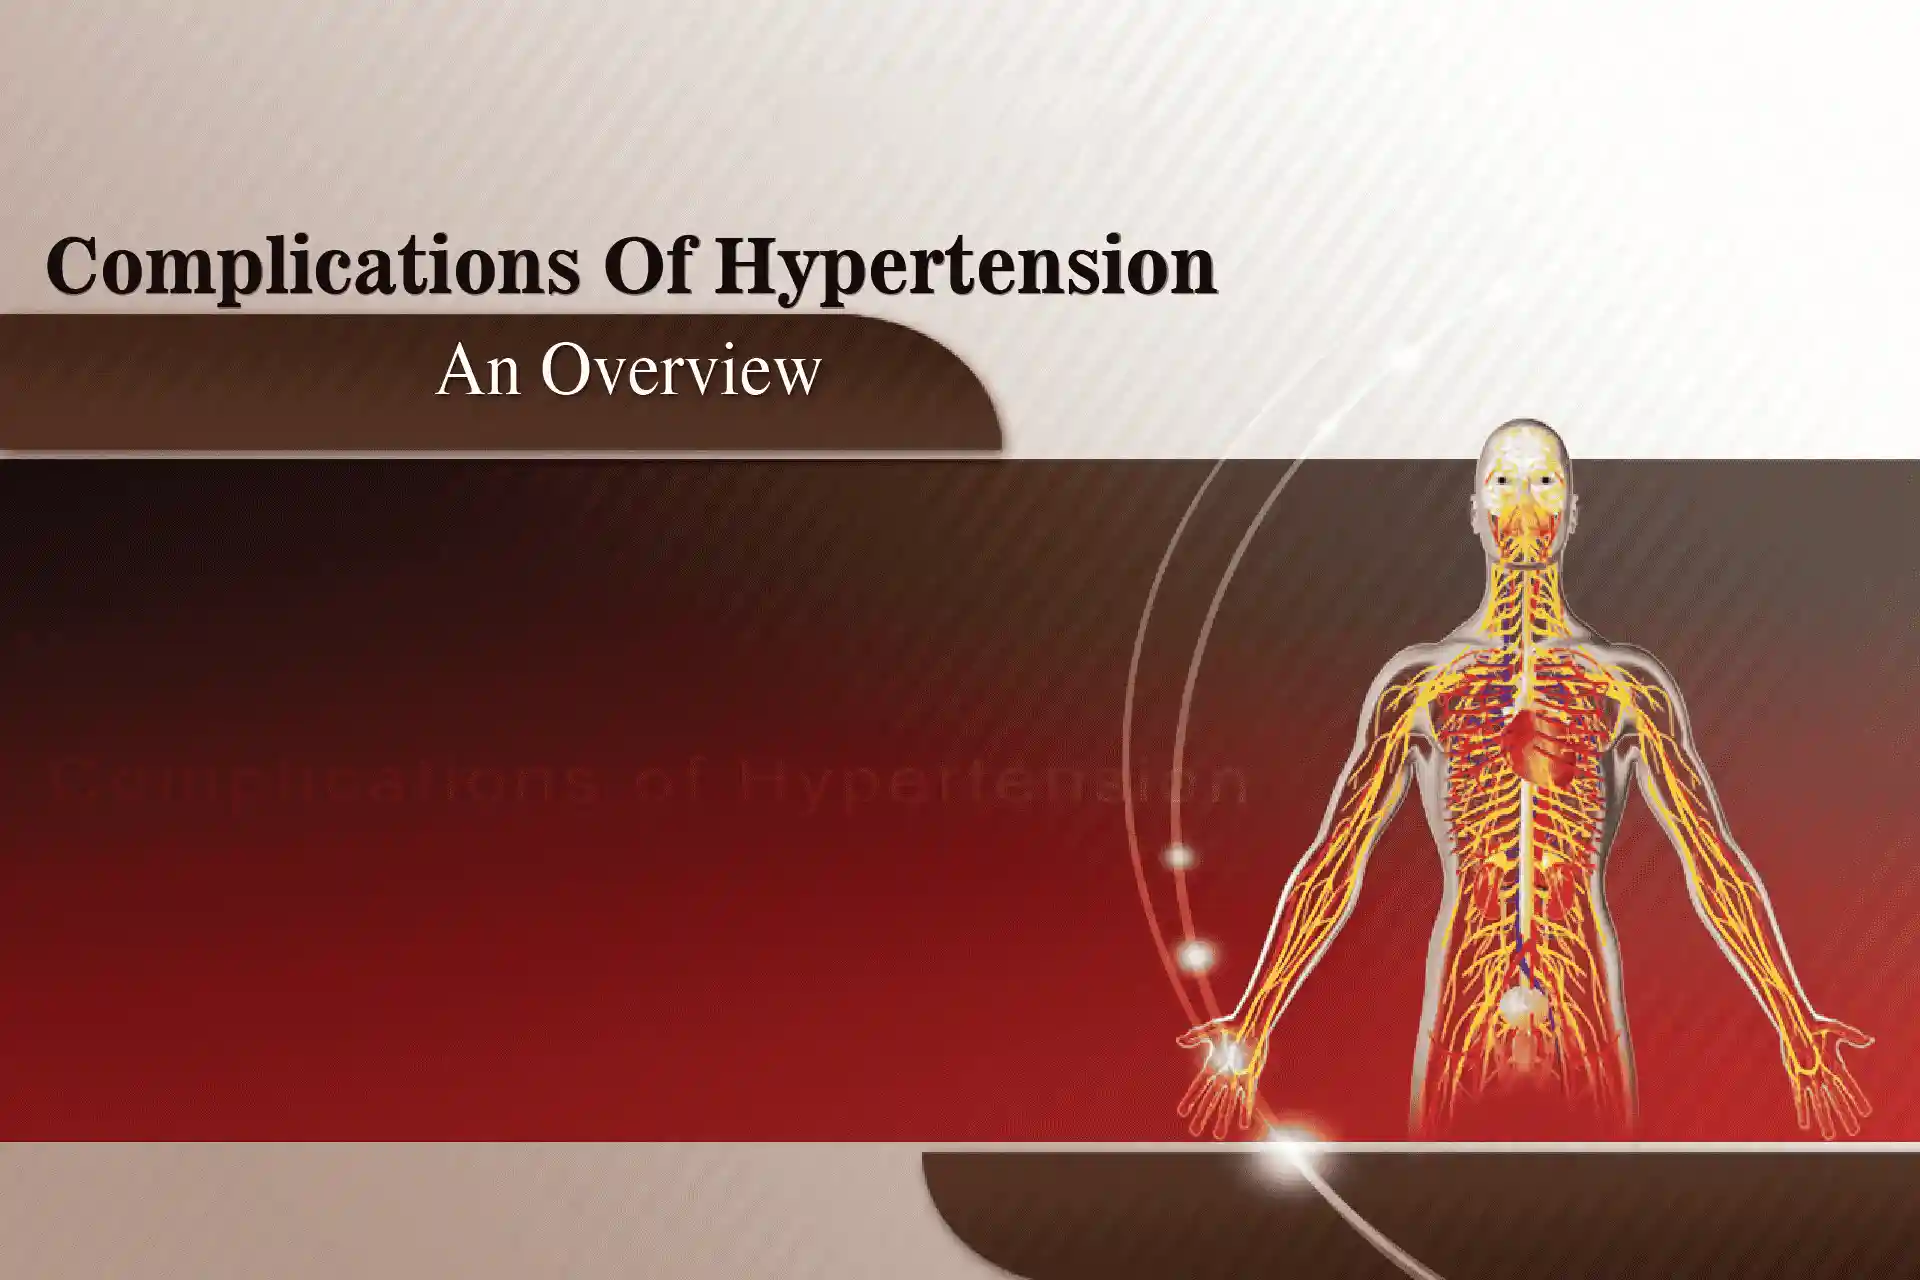 Complications of Hypertension